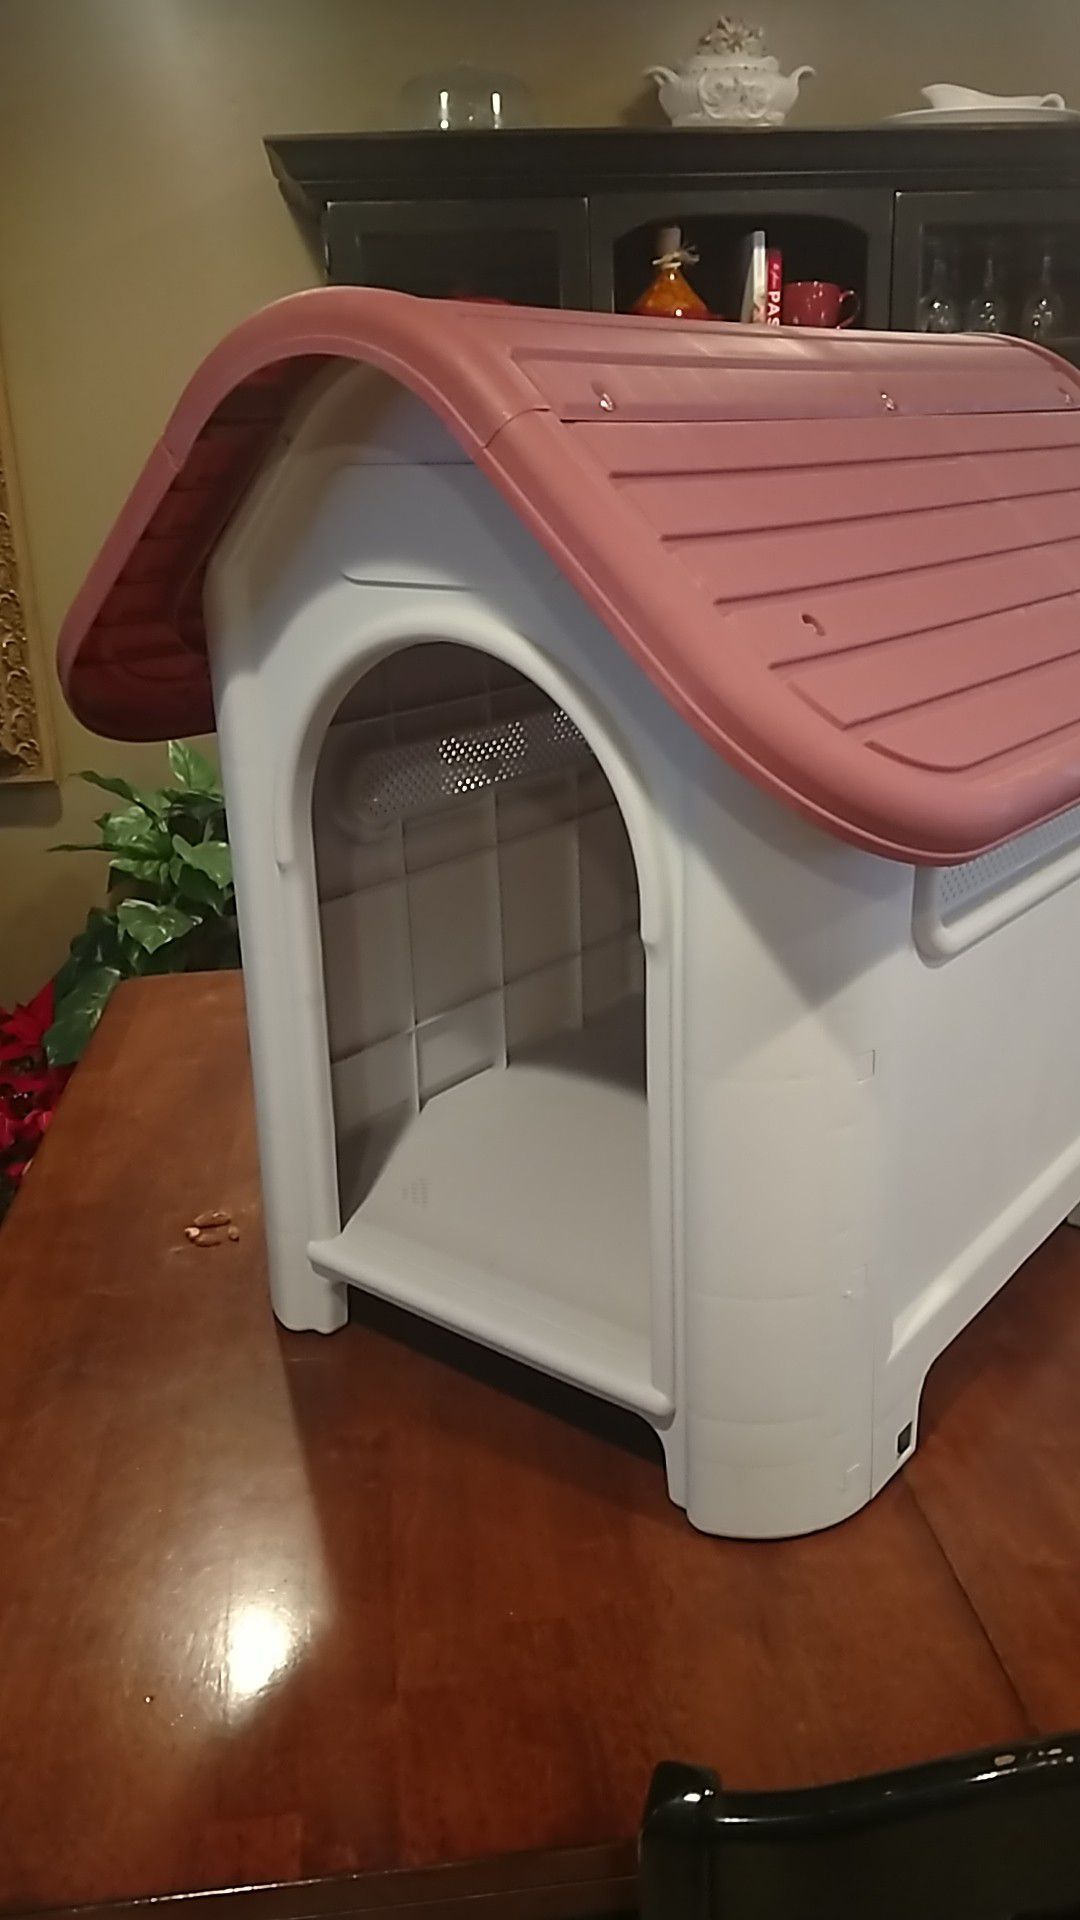 Cat & Dog House Rundy w23.65xd29.5xh26 inches